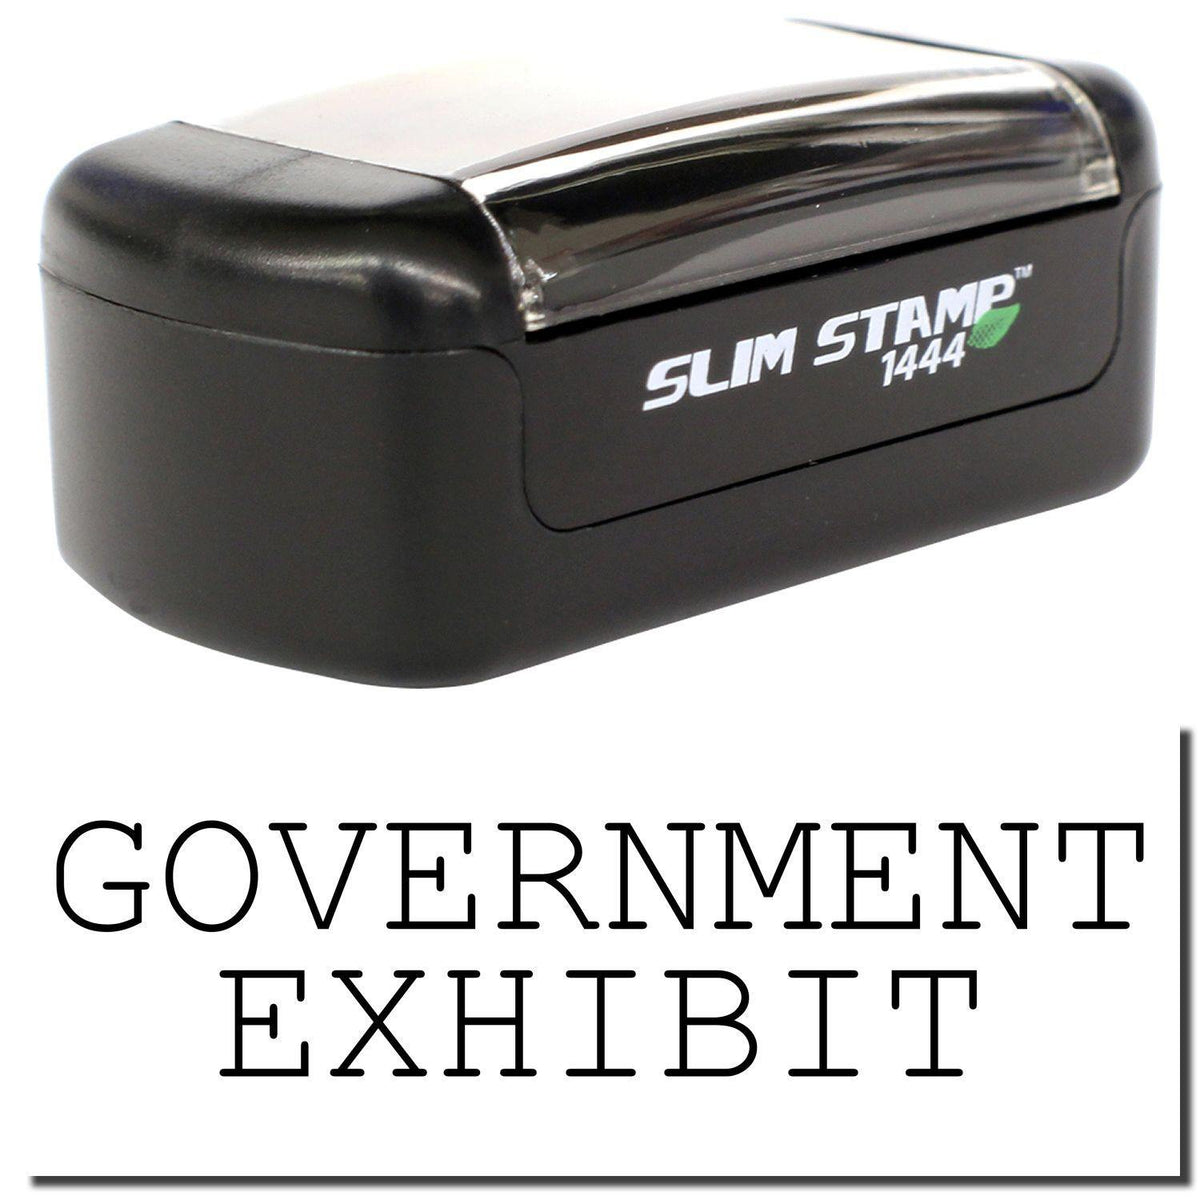 A stock office pre-inked stamp with a stamped image showing how the text &quot;GOVERNMENT EXHIBIT&quot; is displayed after stamping.